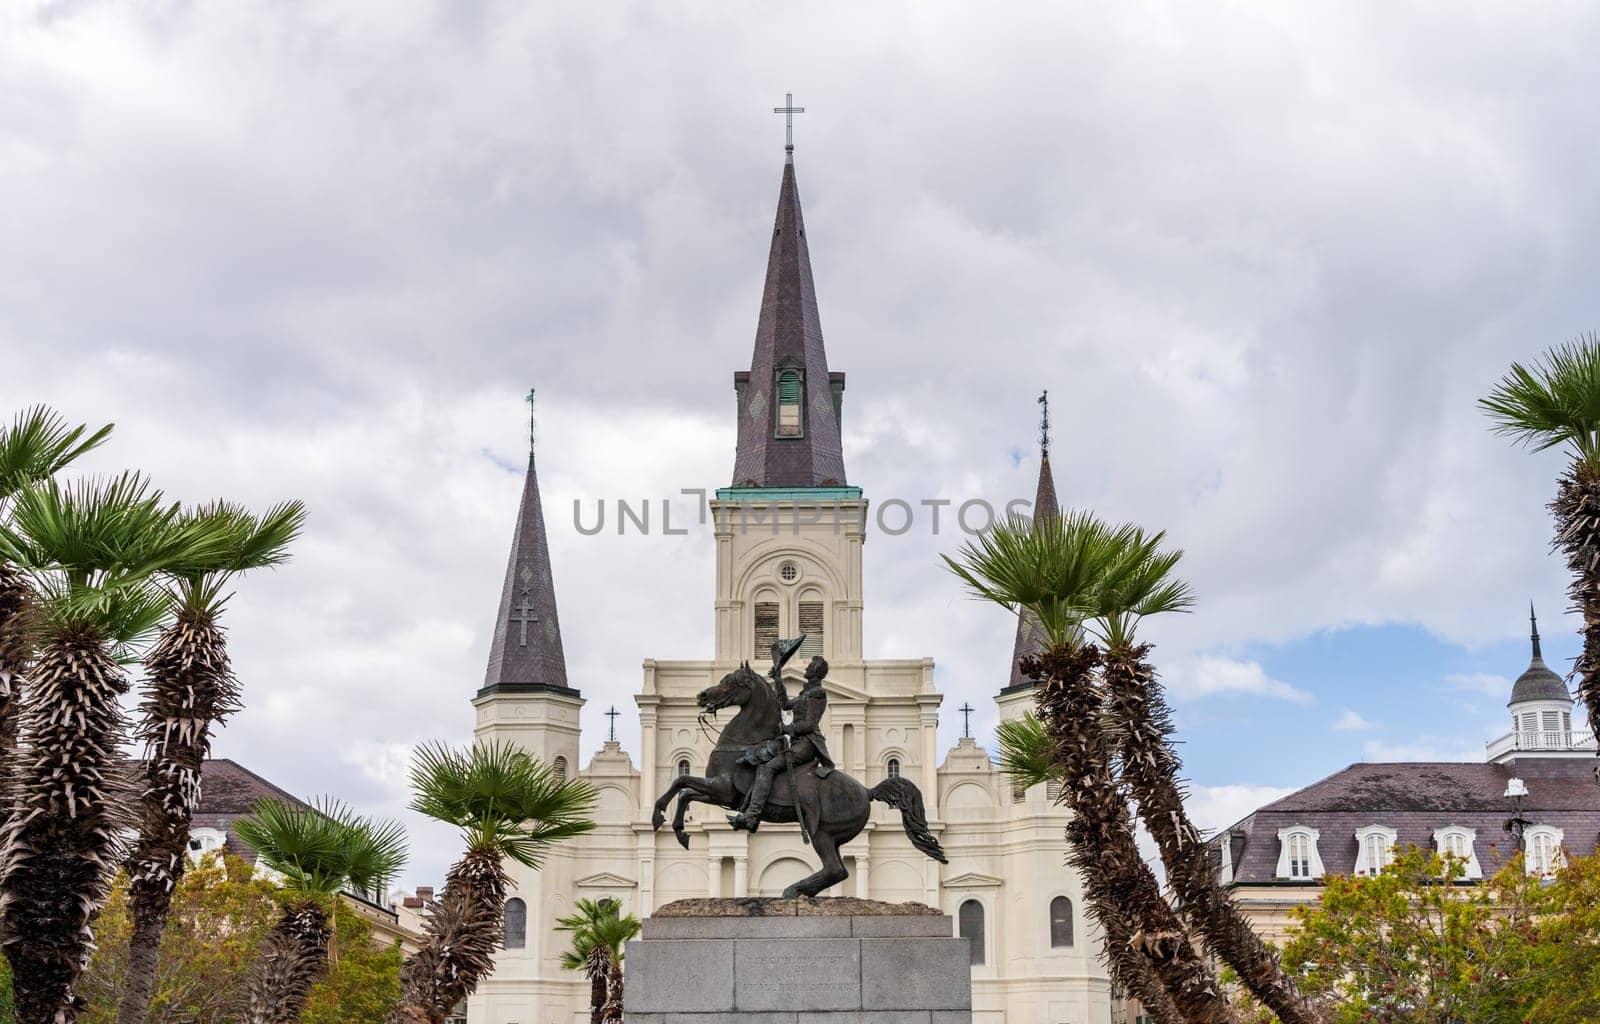 Facade of Cathedral Basilica of Saint Louis in New Orleans, LA by steheap